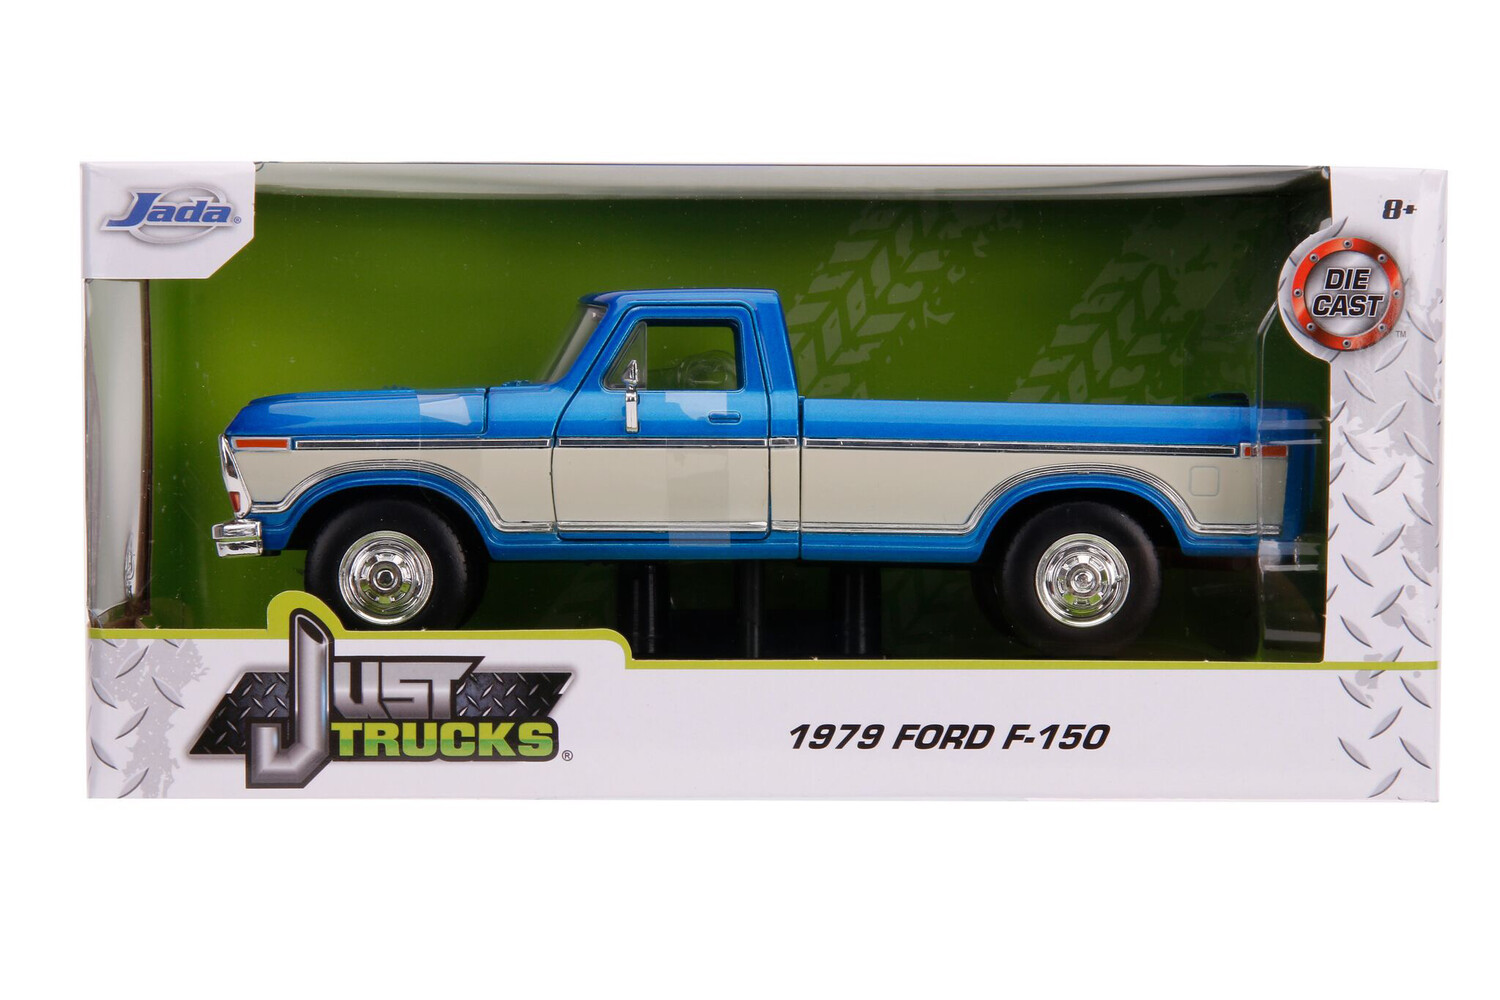 1979 Ford Pick up